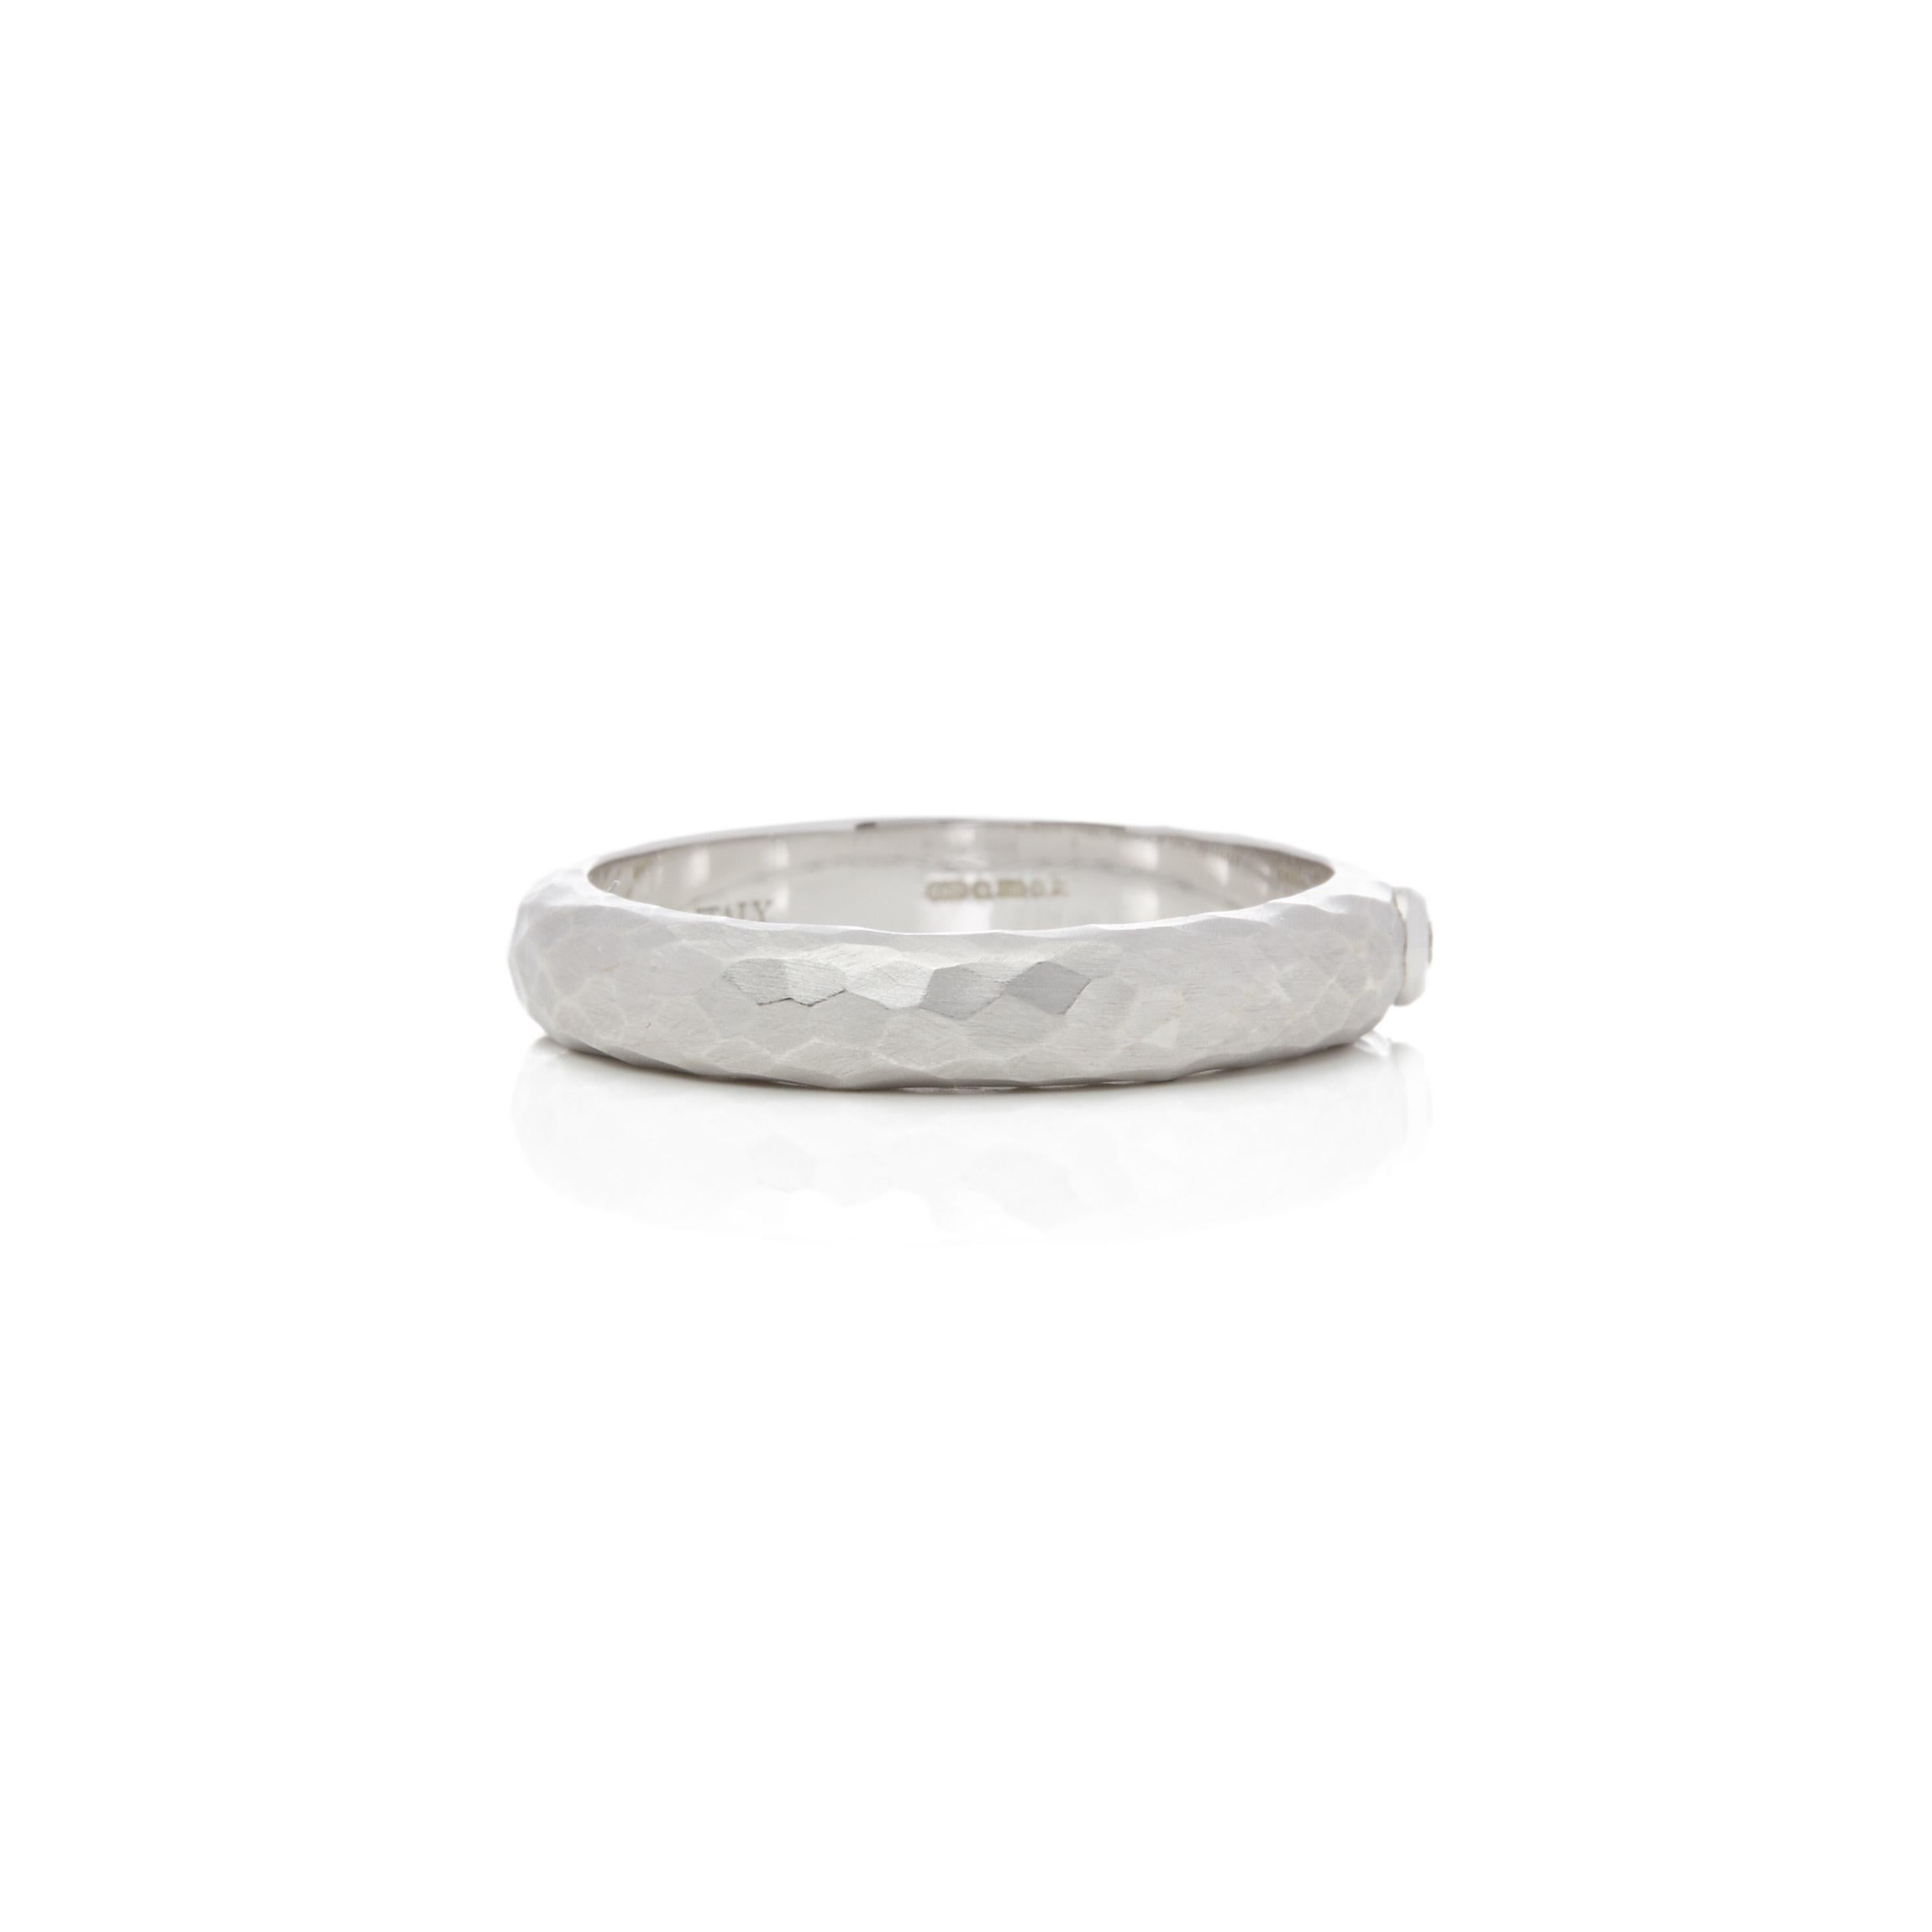 This Ring by Tiffany & Co is from their Paloma Picasso Collection and features a single Round Brilliant Diamond Mounted in an 18k White Gold Hammered Finish 4.23mm Band. Finger Size UK T, EU size 61 1/2, USA Size 9 5/8. Complete with Original Box